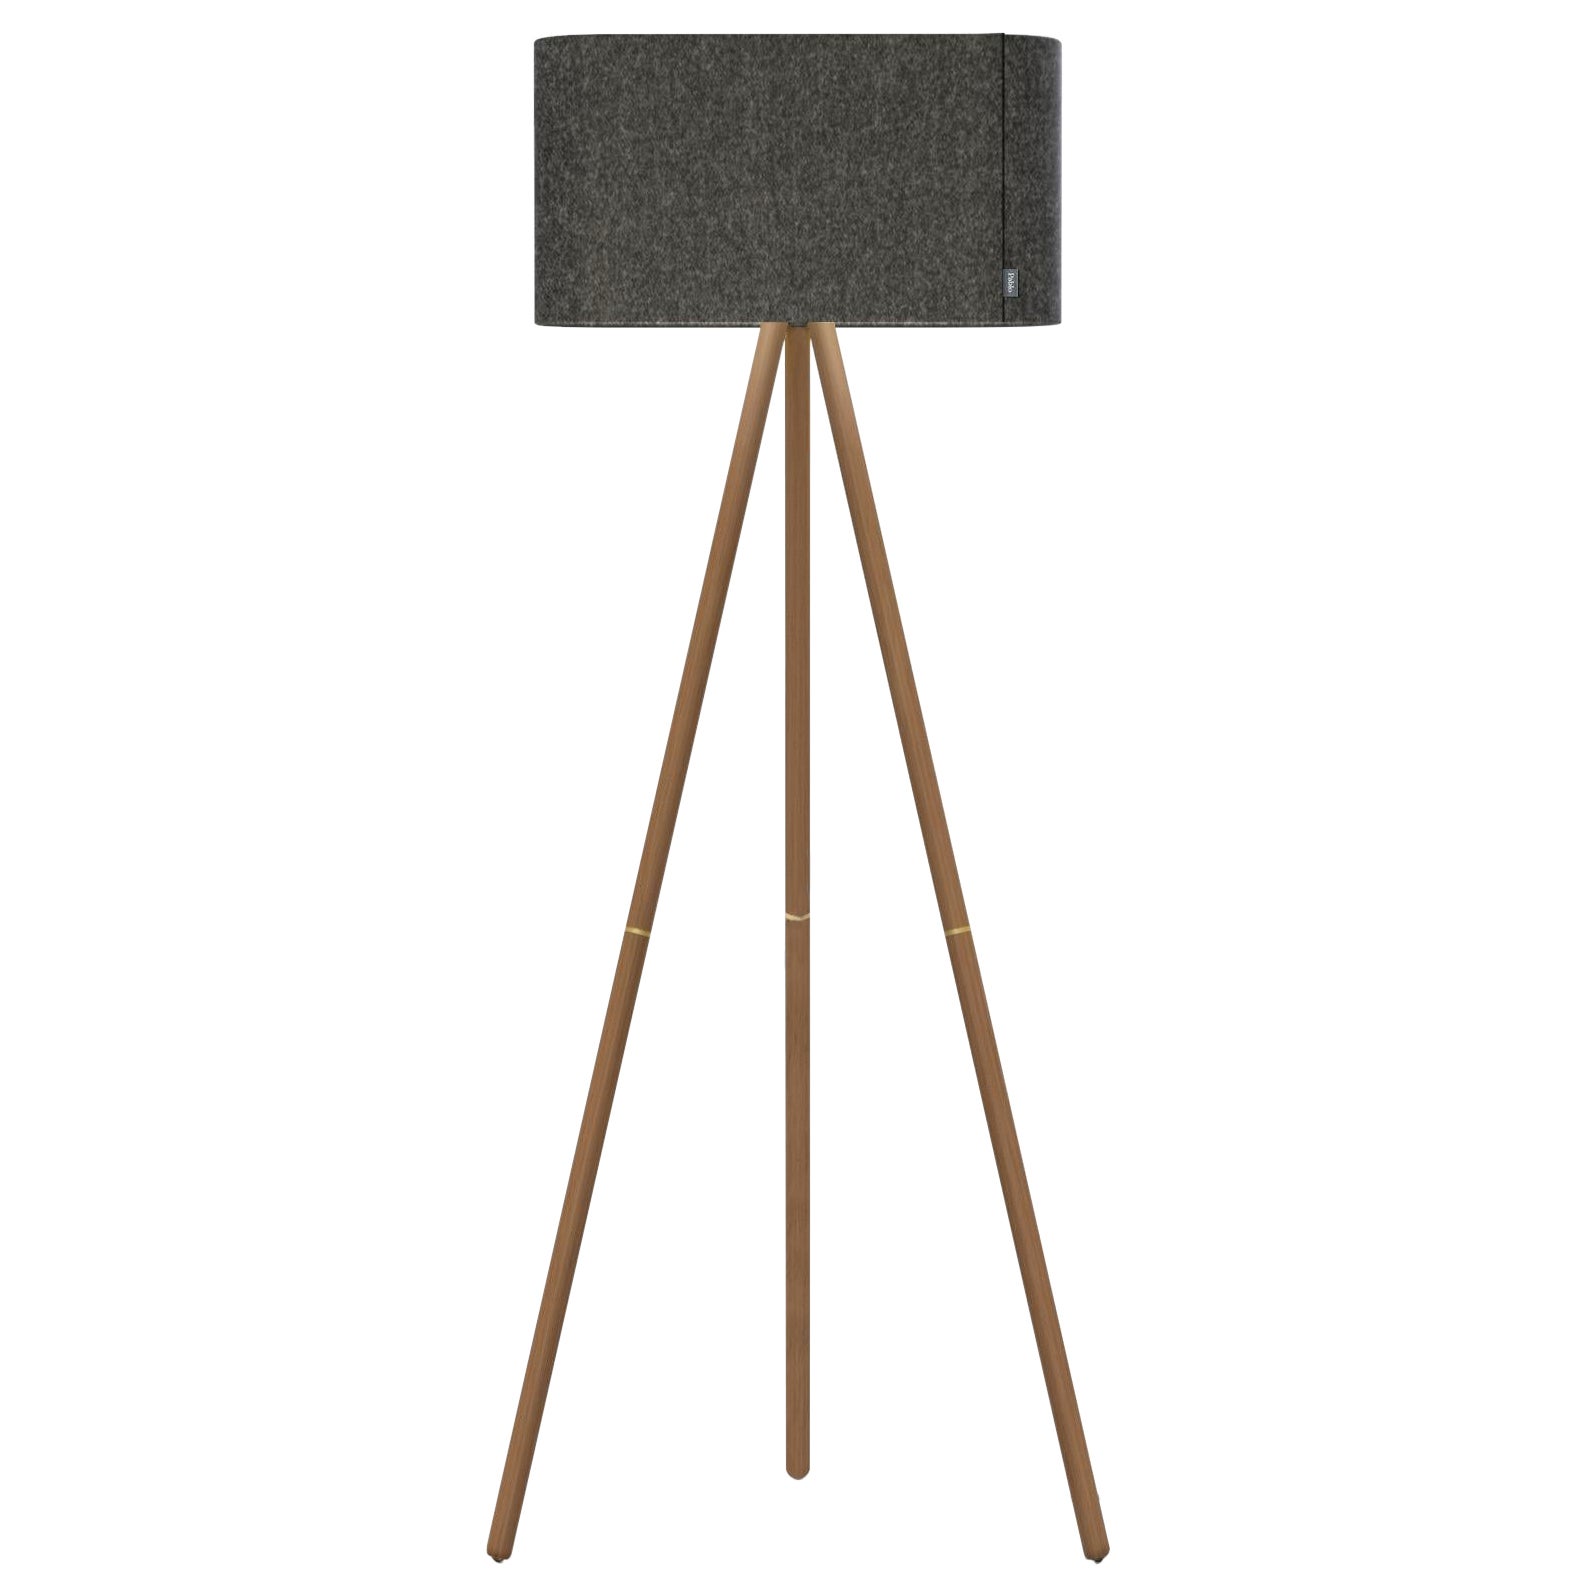 Belmont Floor Lamp in Charcoal with Walnut Legs by Pablo Designs For Sale